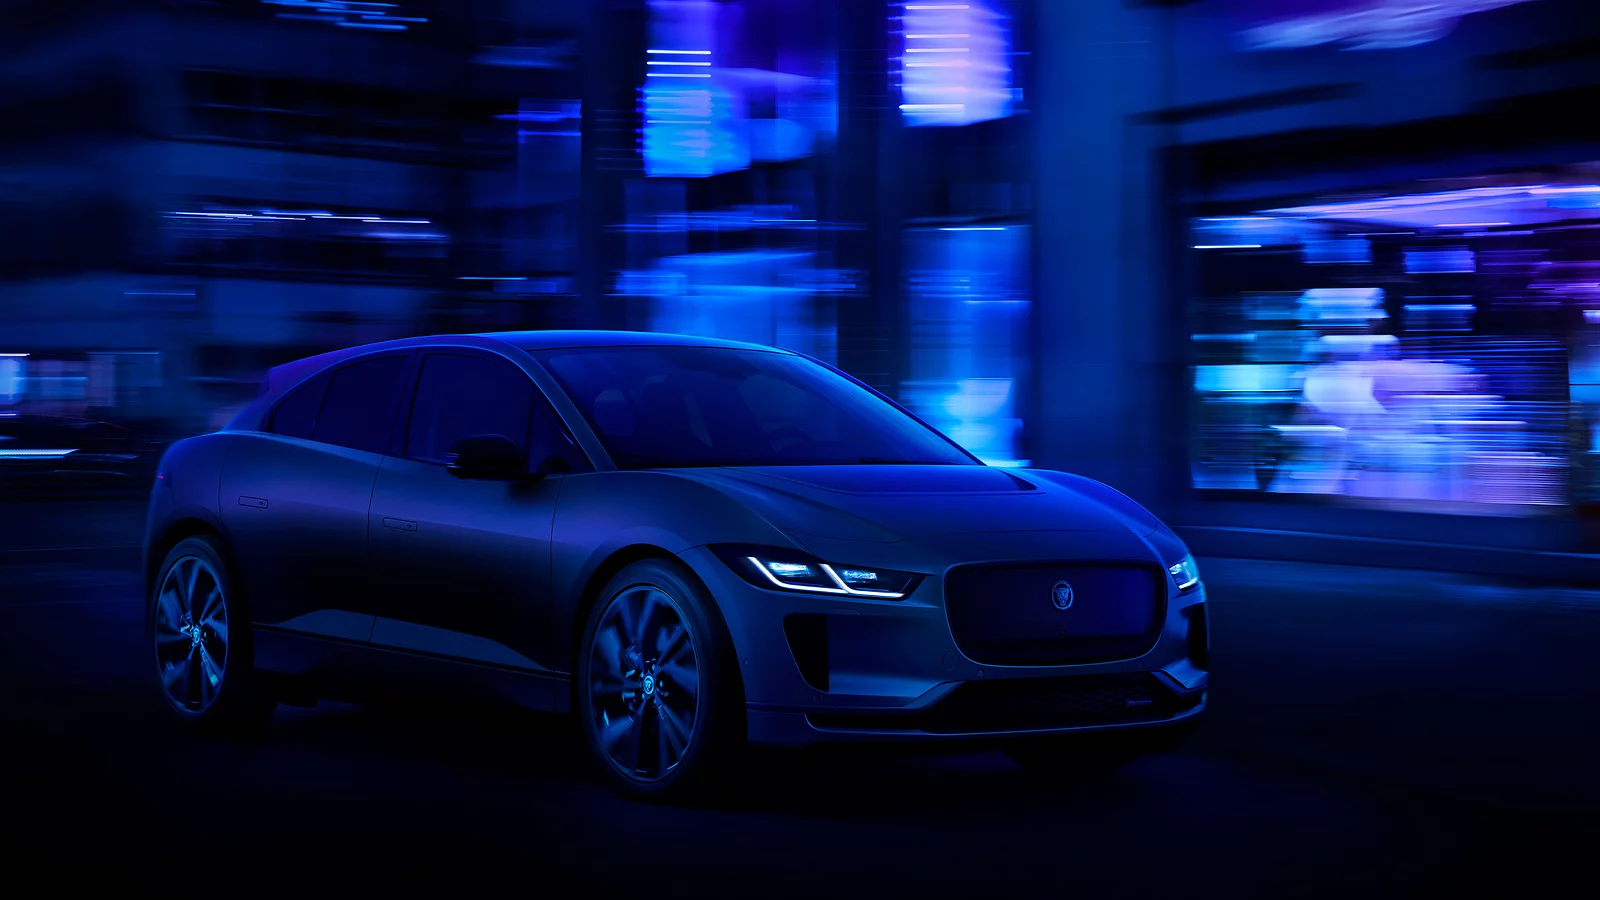 Jaguar I-PACE running in the city